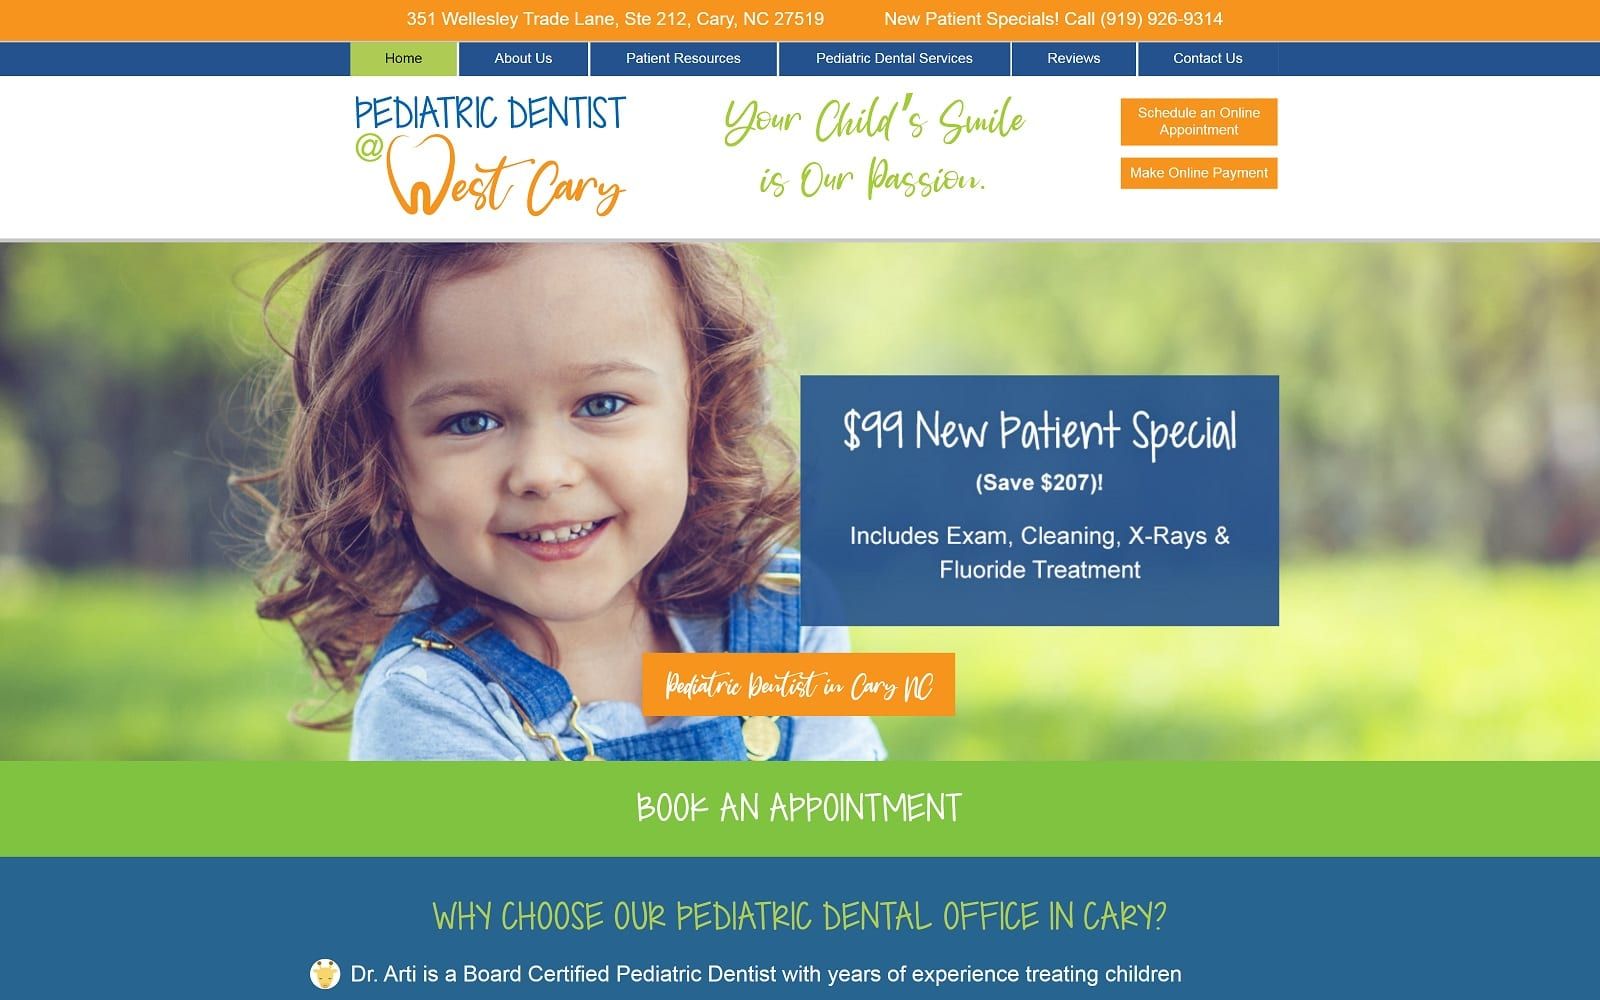 The screenshot of pediatric dentist at west cary pediatricdentistatwestcary. Com dr. Arti website